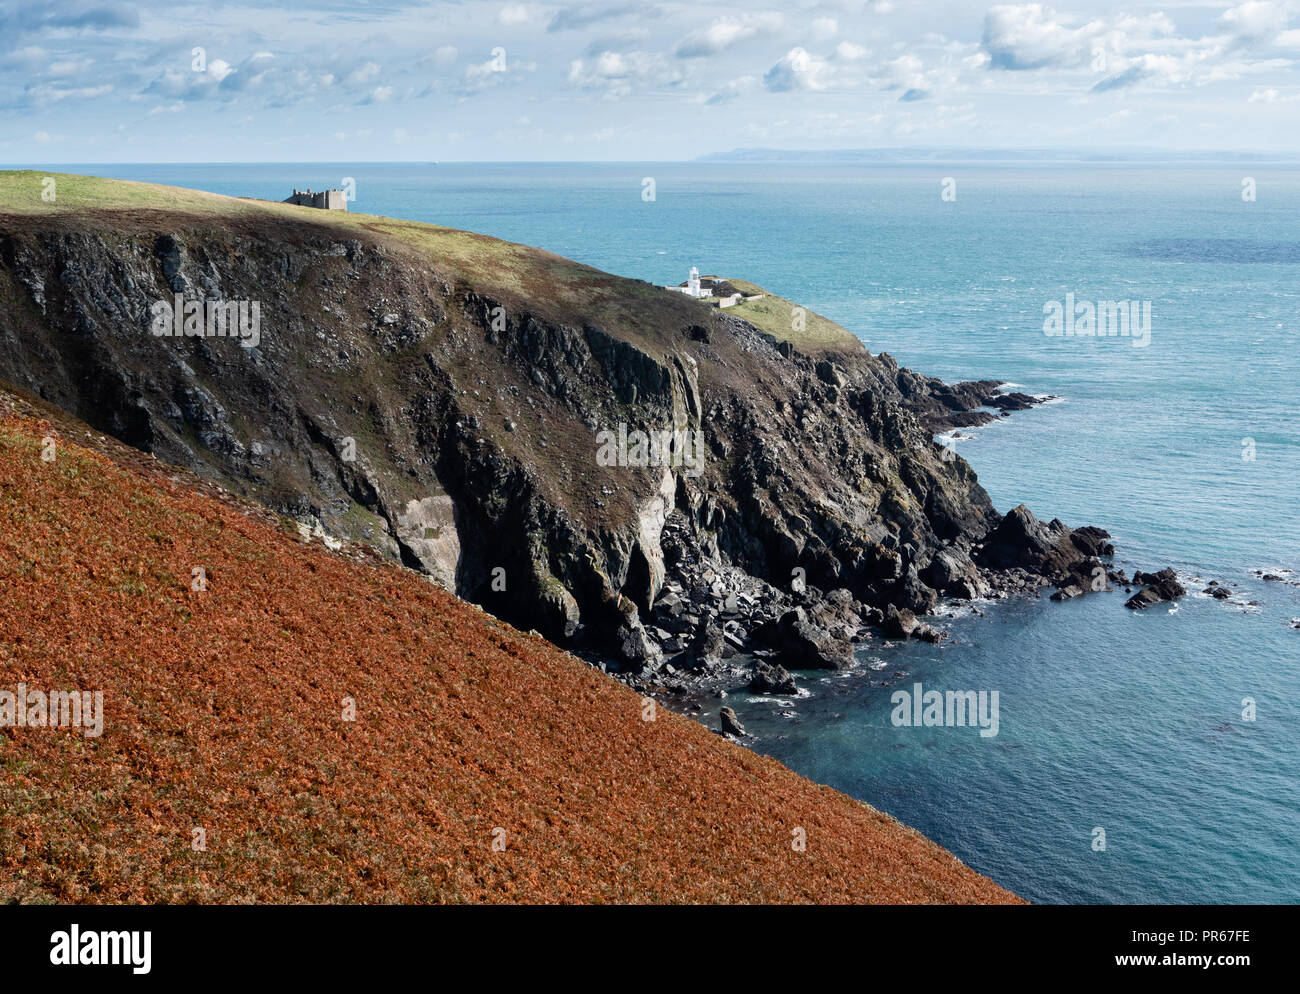 Rugged south coast of Lundy island looking towards Marisco Castle and South Light lighthouse with the Devon coast on the far horizon Stock Photo